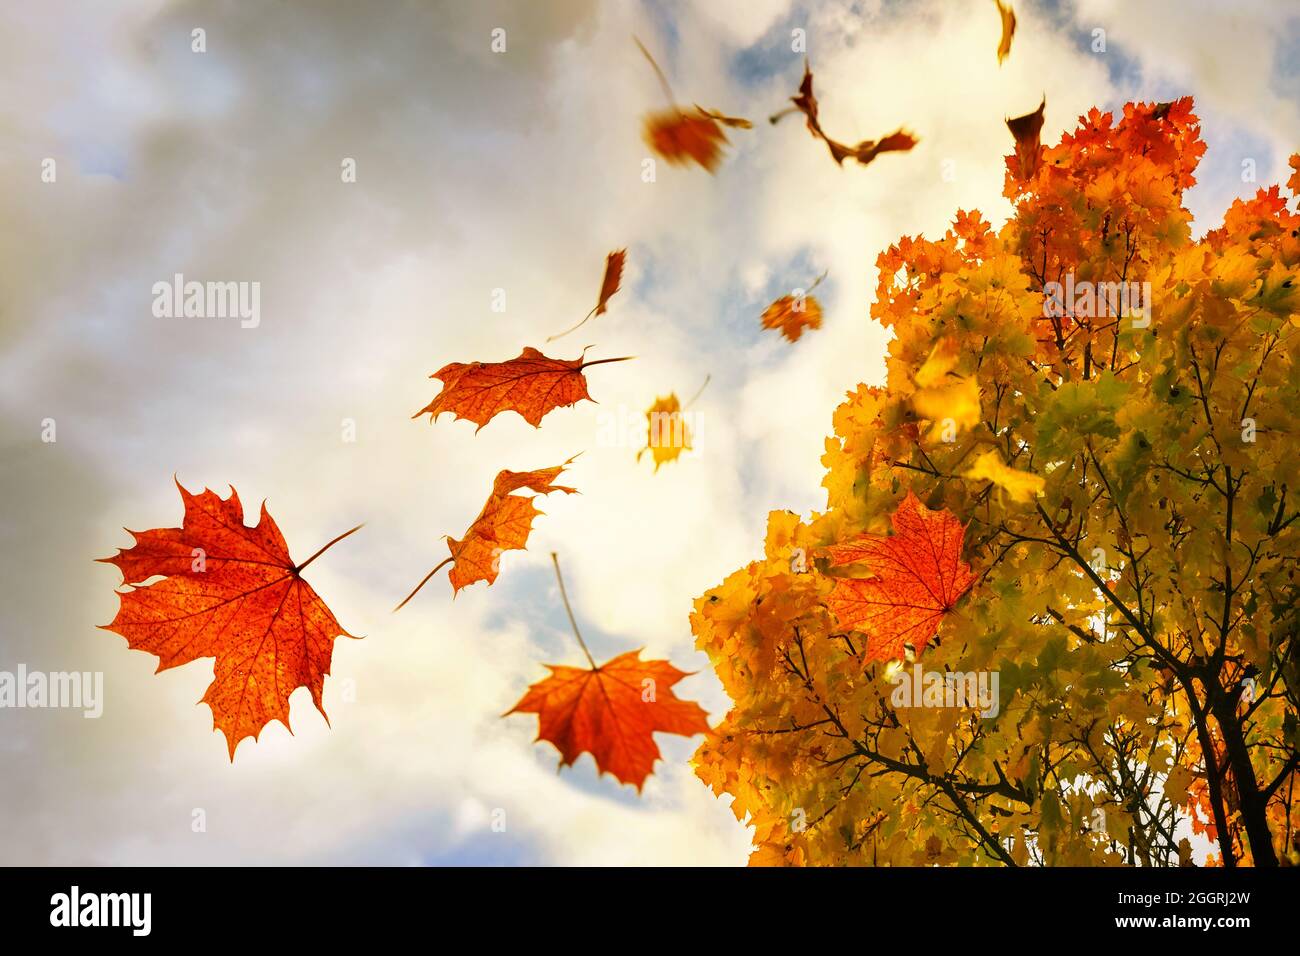 Red and golden colored autumn leaves falling down from a maple tree, sky with clouds and copy space, motion blur, selected focus, narrow depth of fiel Stock Photo